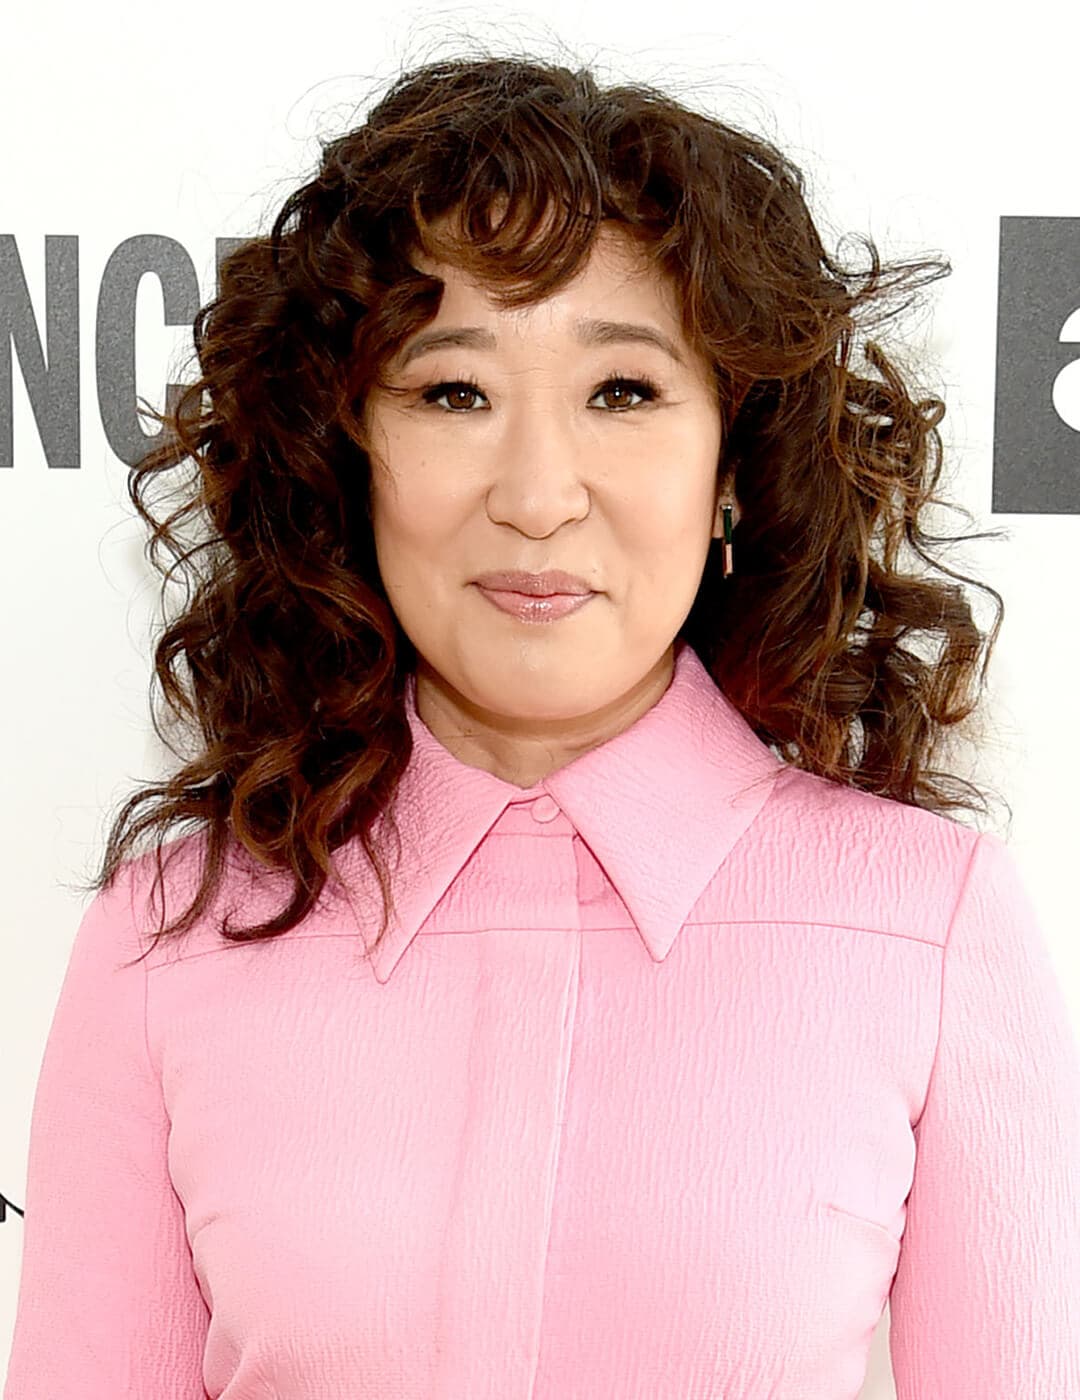 Smirking Sandra Oh rocking a wavy hairstyle and pink jumpsuit